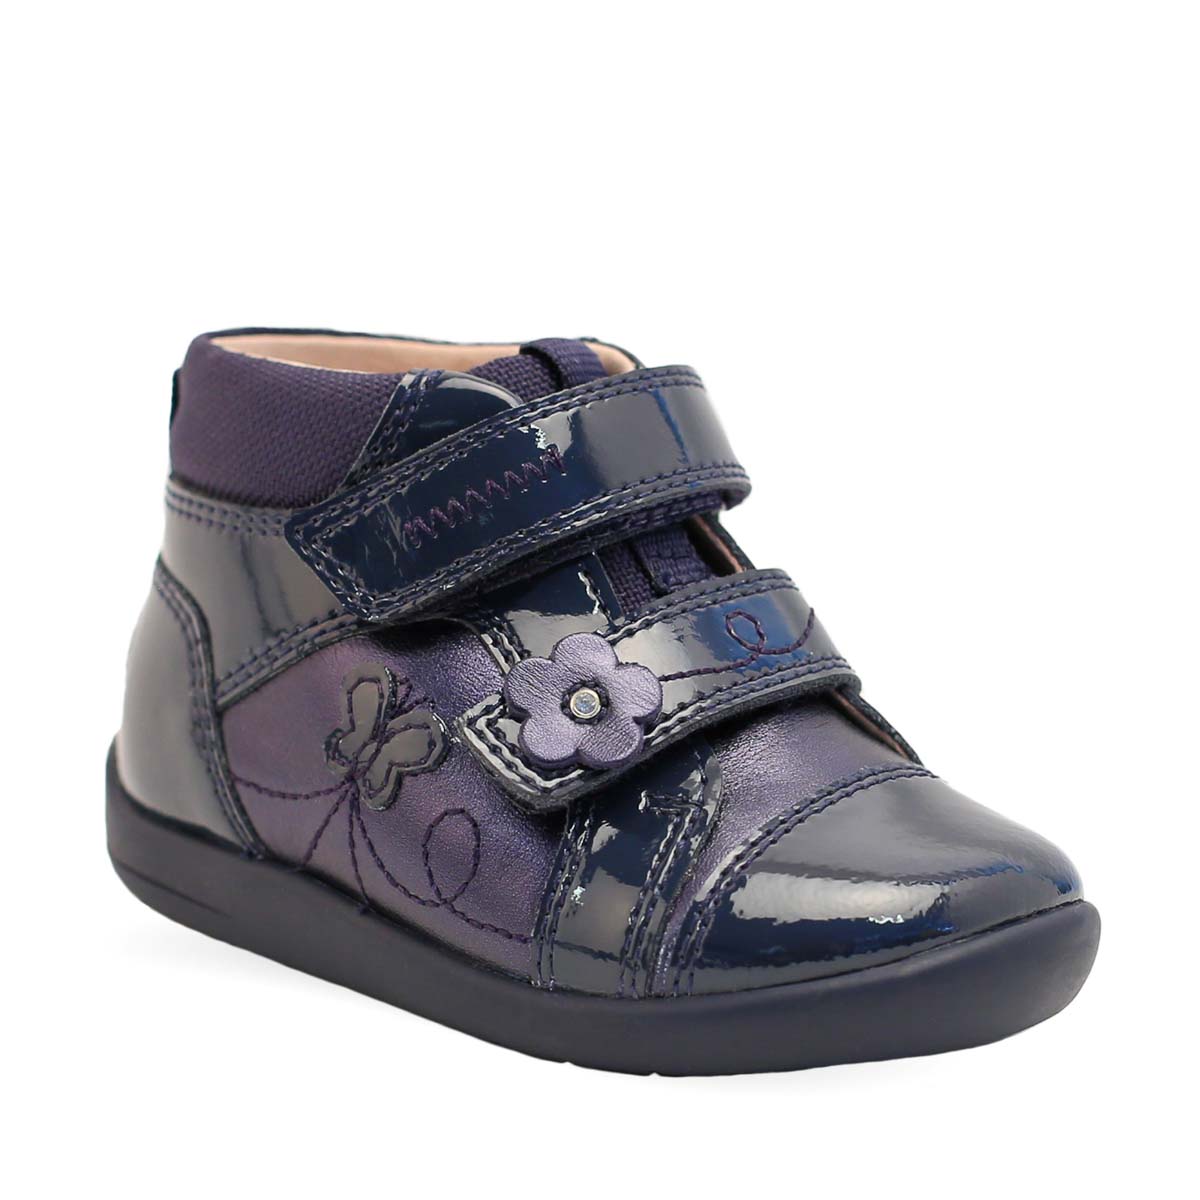 Start Rite - Daydream 2V In Navy Patent 0792-96F In Size 5 In Plain Navy Patent Infant Girls Boots  In Navy Patent For kids